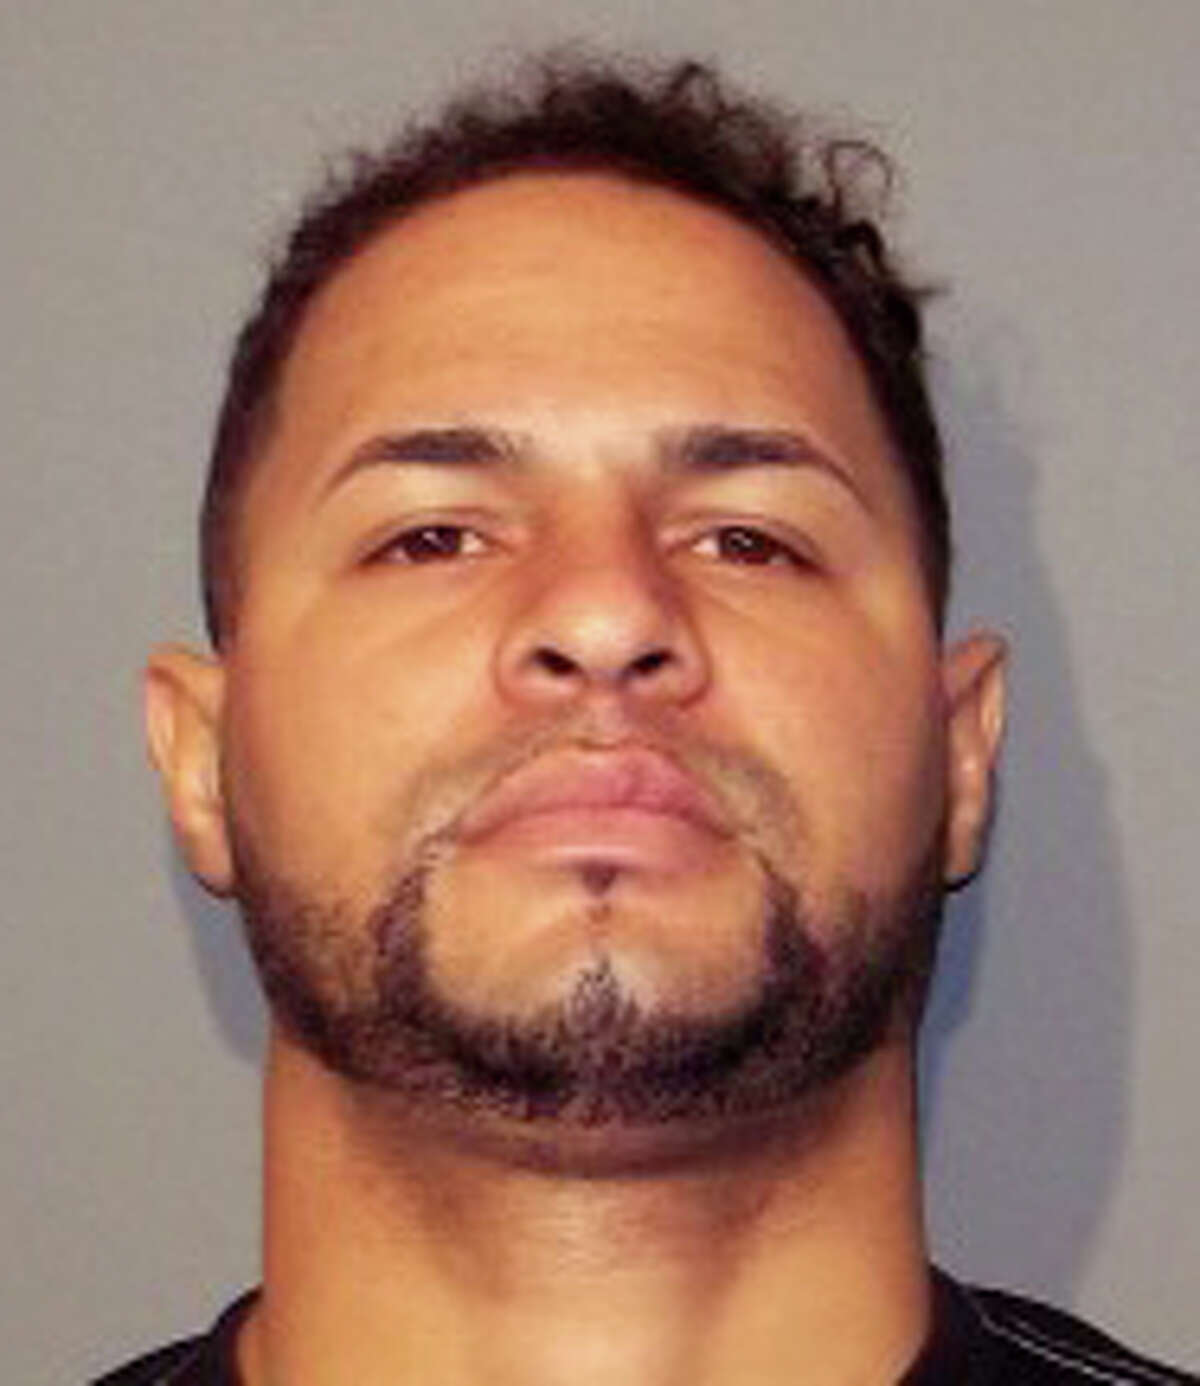 Eleudys Hernandez, 27, of Bronx, N.Y., faces charges in connection with fraudulent cell phone insurance claims, according to New Canaan police.